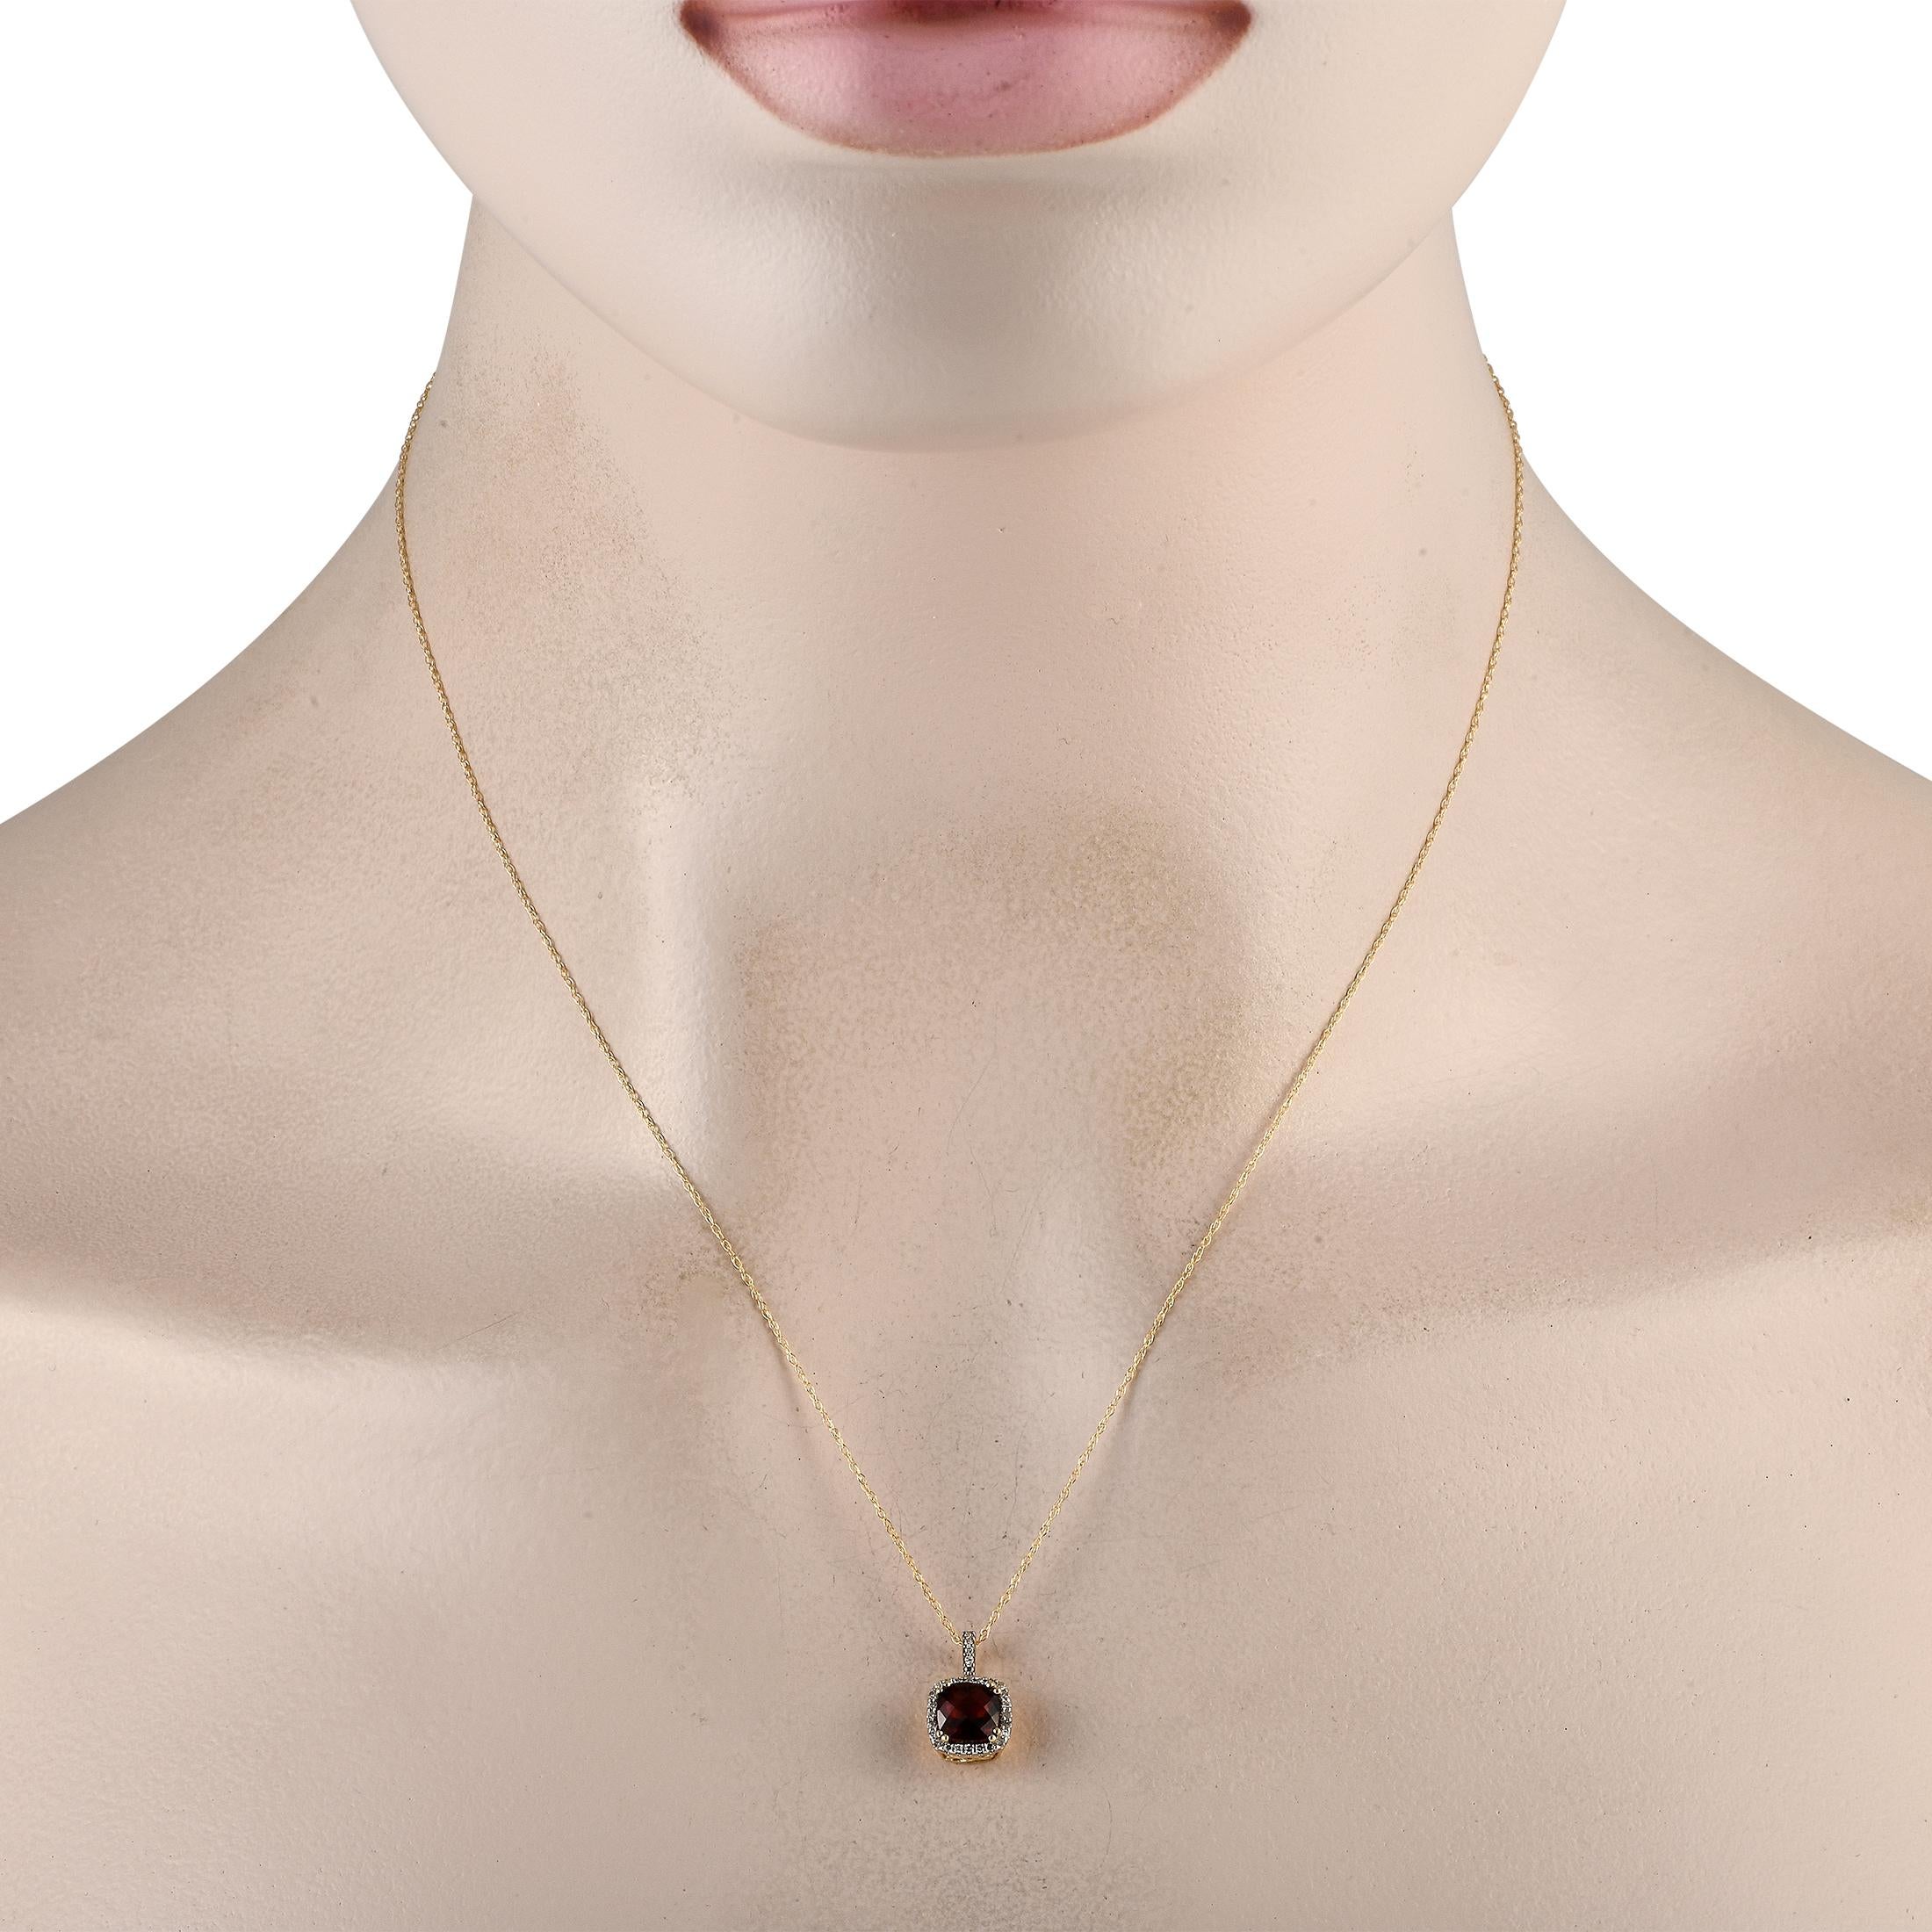 A breathtaking Garnet gemstone is surrounded by a halo of Diamonds totaling 0.09 carats on this exquisite, timeless necklace. This piece is crafted from 14K Yellow Gold and includes a pendant measuring 0.50 long by 0.25 wide suspended from an 18